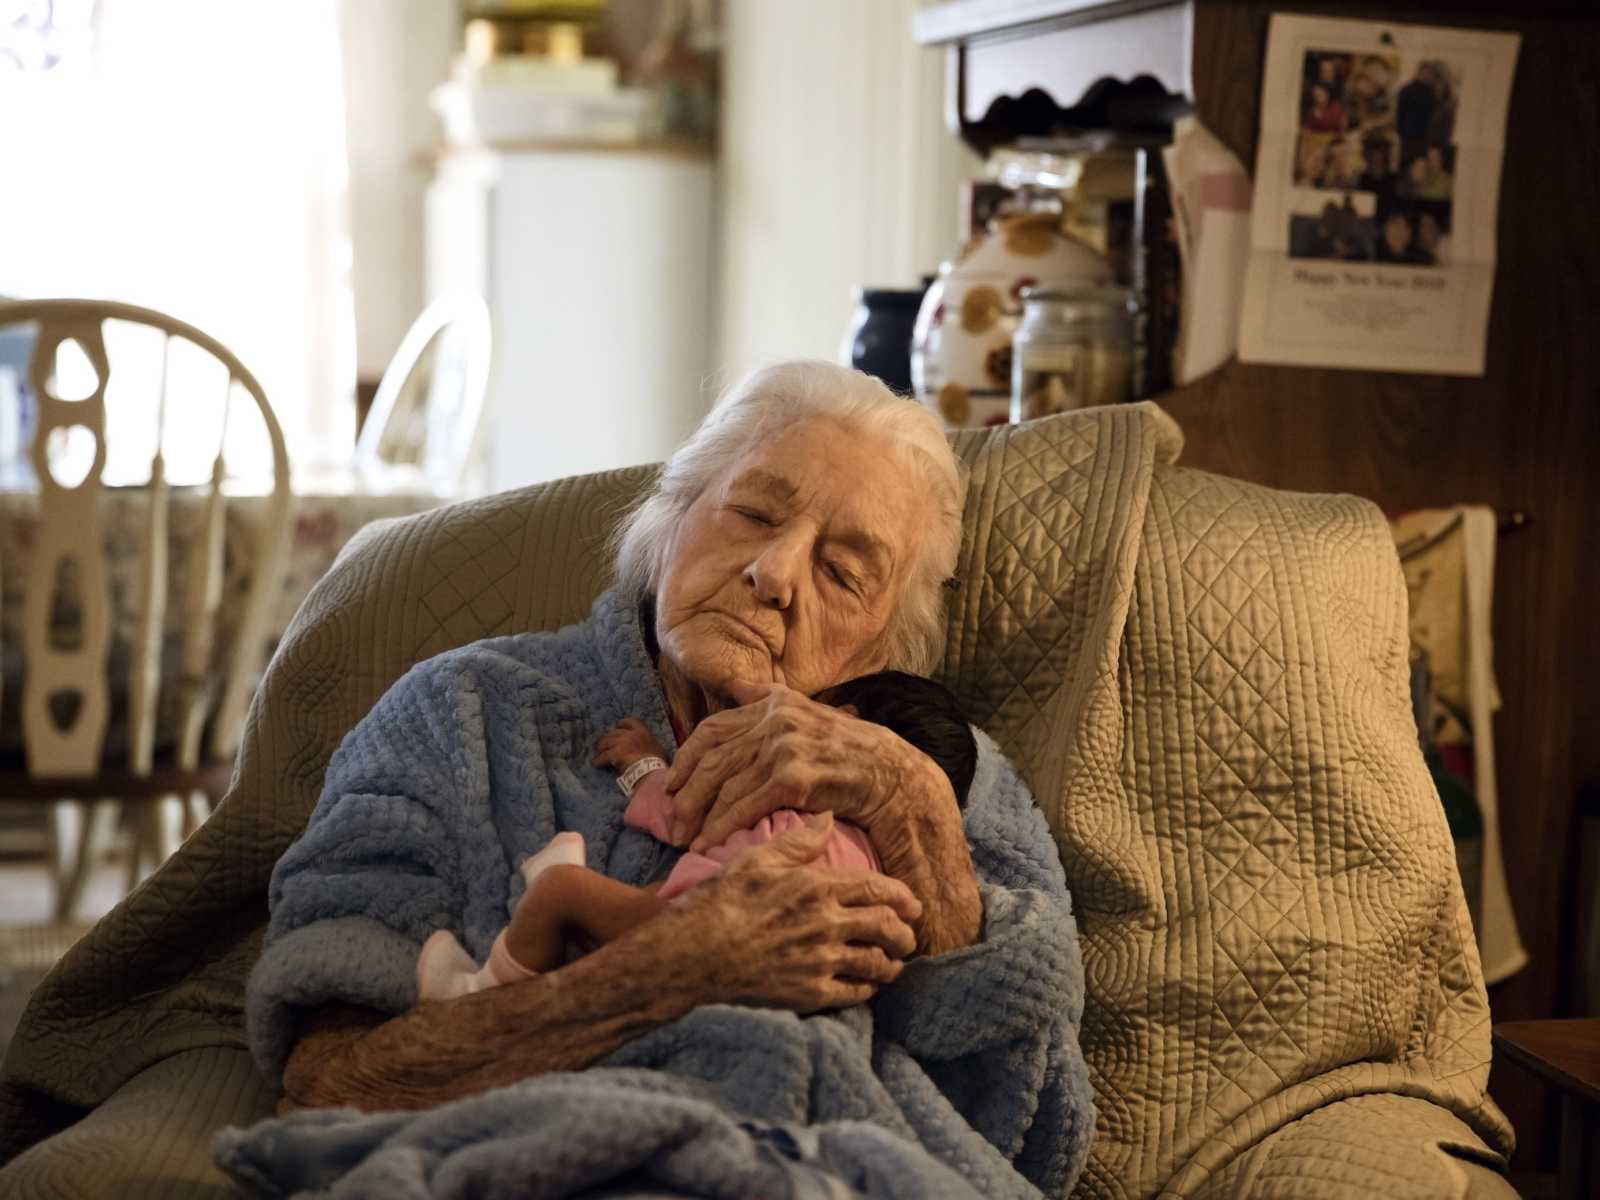 92 year old woman holds newborn baby who is her name sake close to her chest